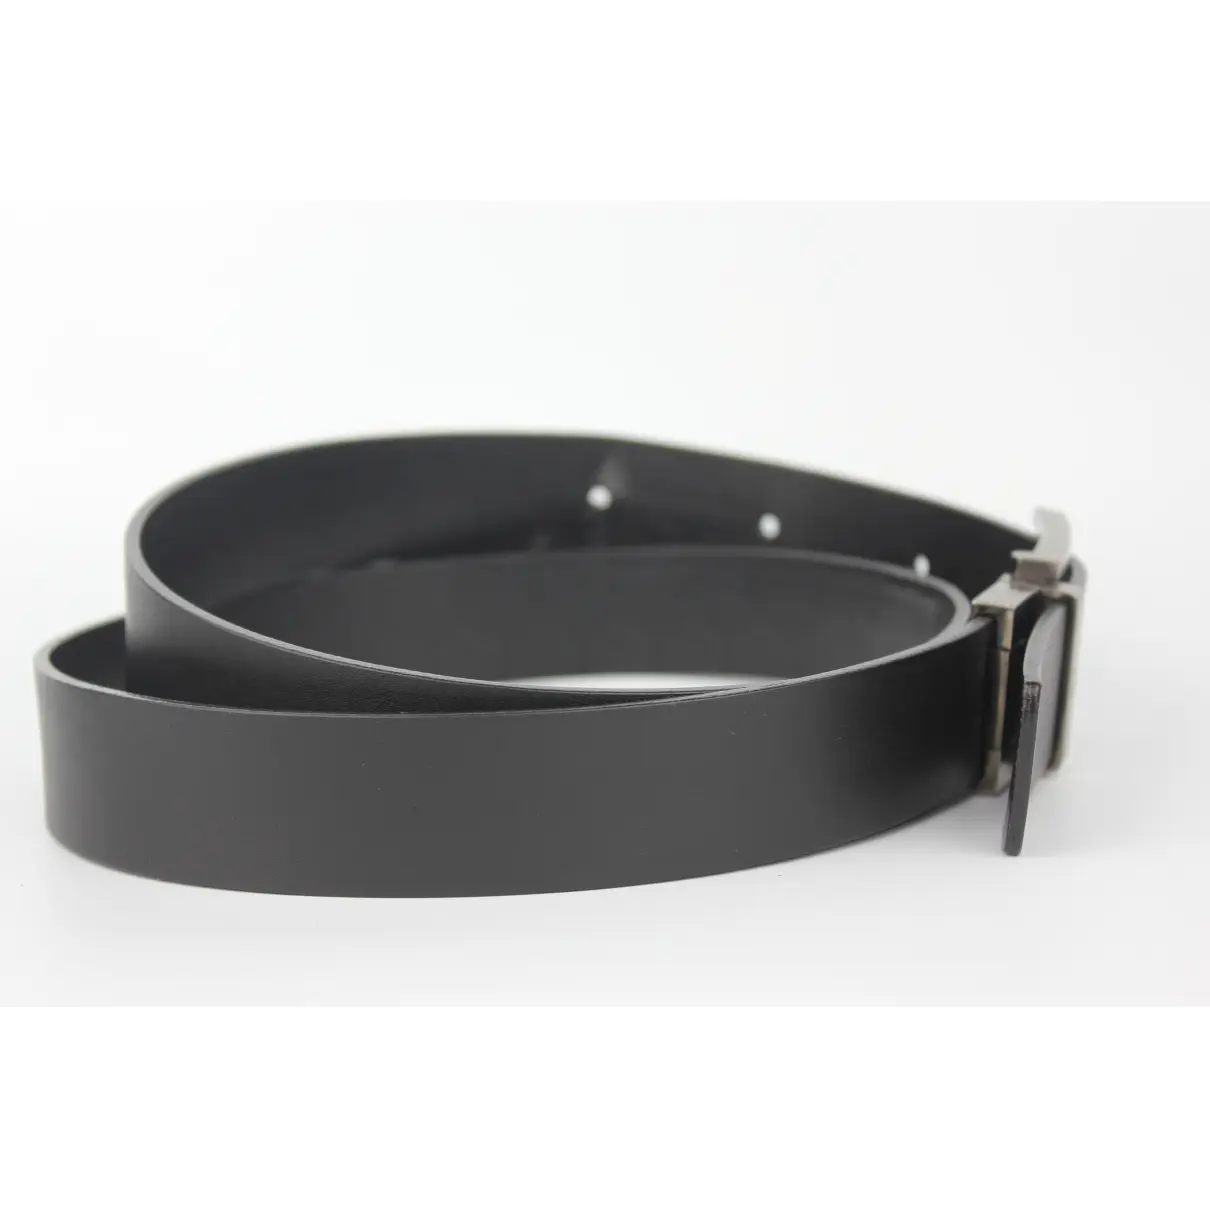 Leather belt Alfred Dunhill